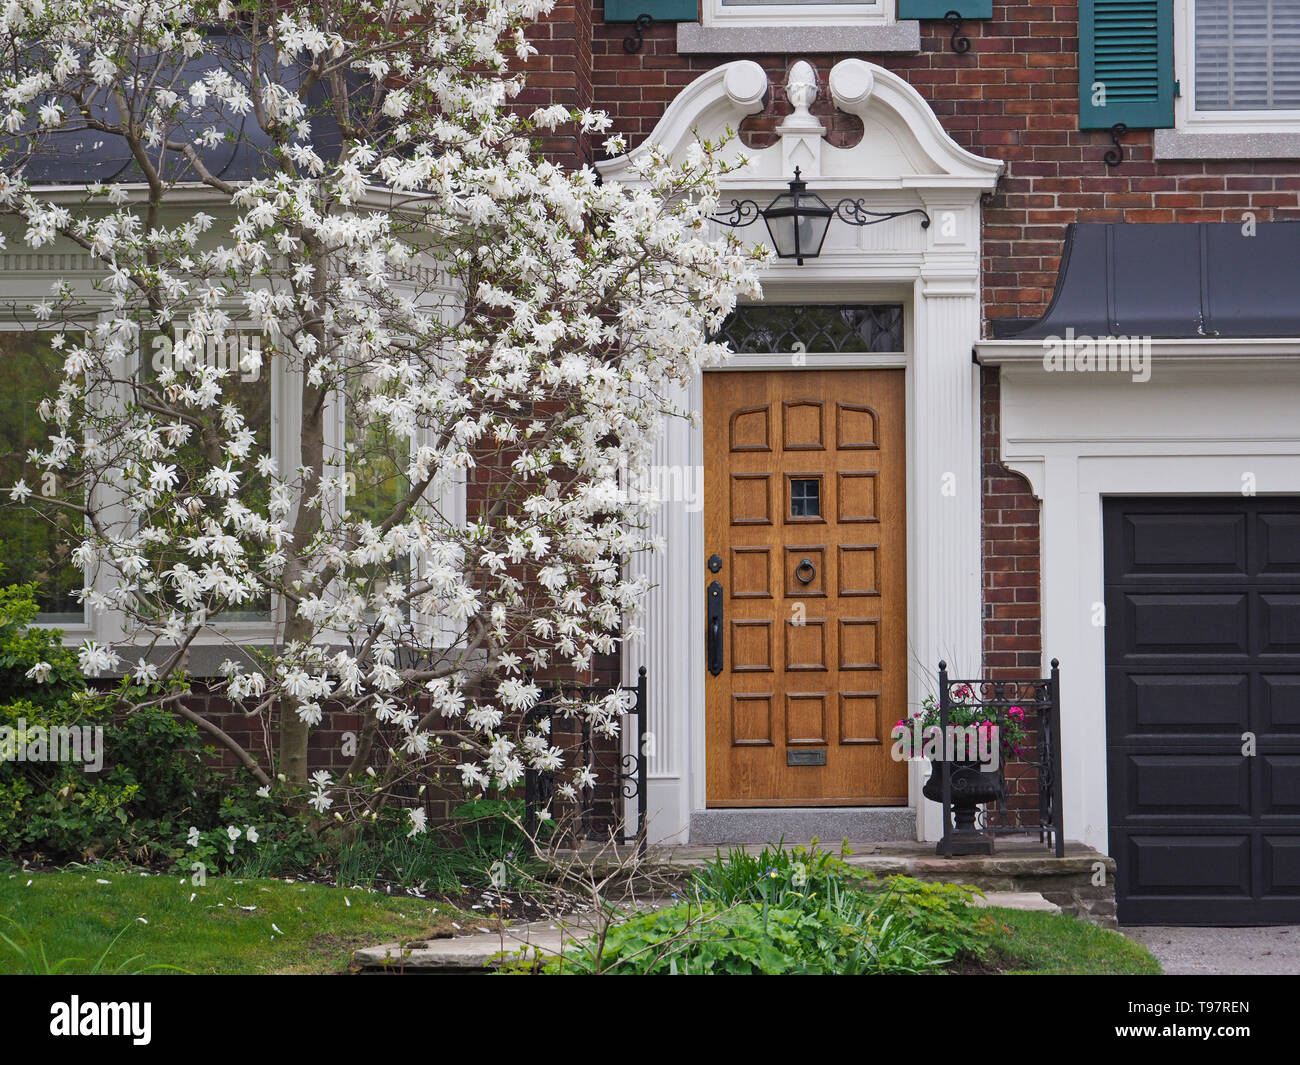 Elegant wooden front door of house with white magnolia tree  in bloom Stock Photo